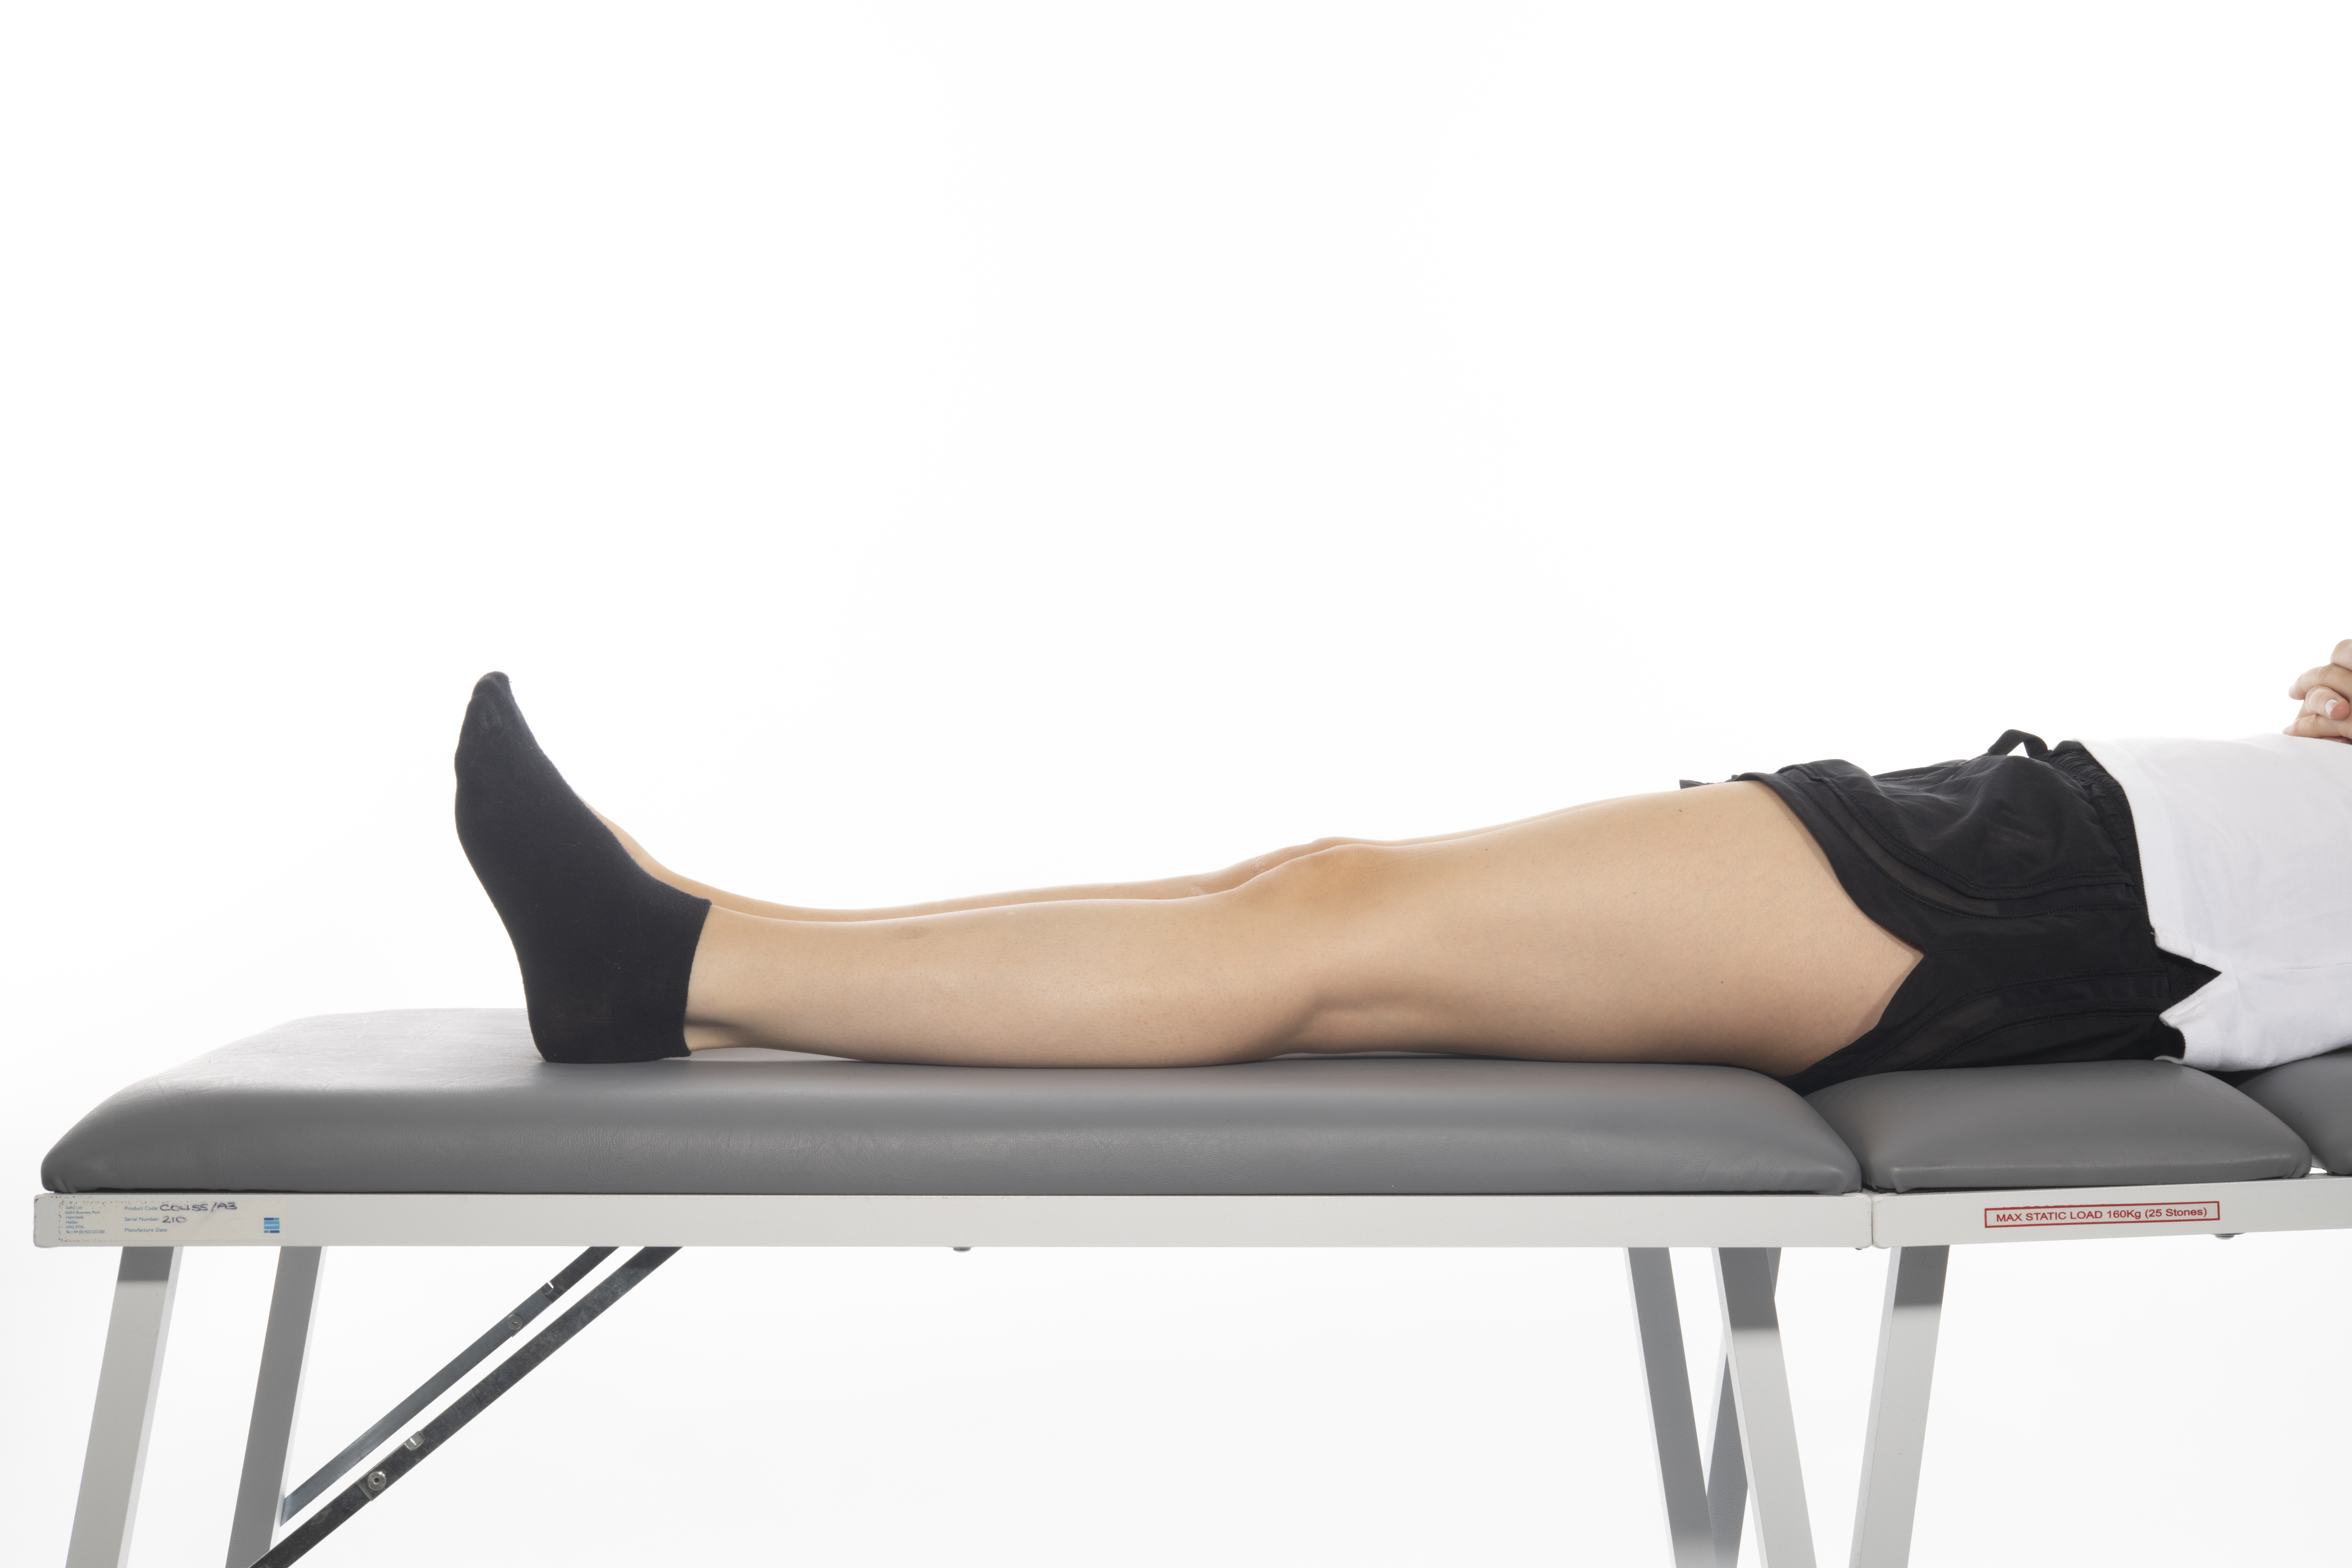 Lying hip flexion exercise; lie on bed